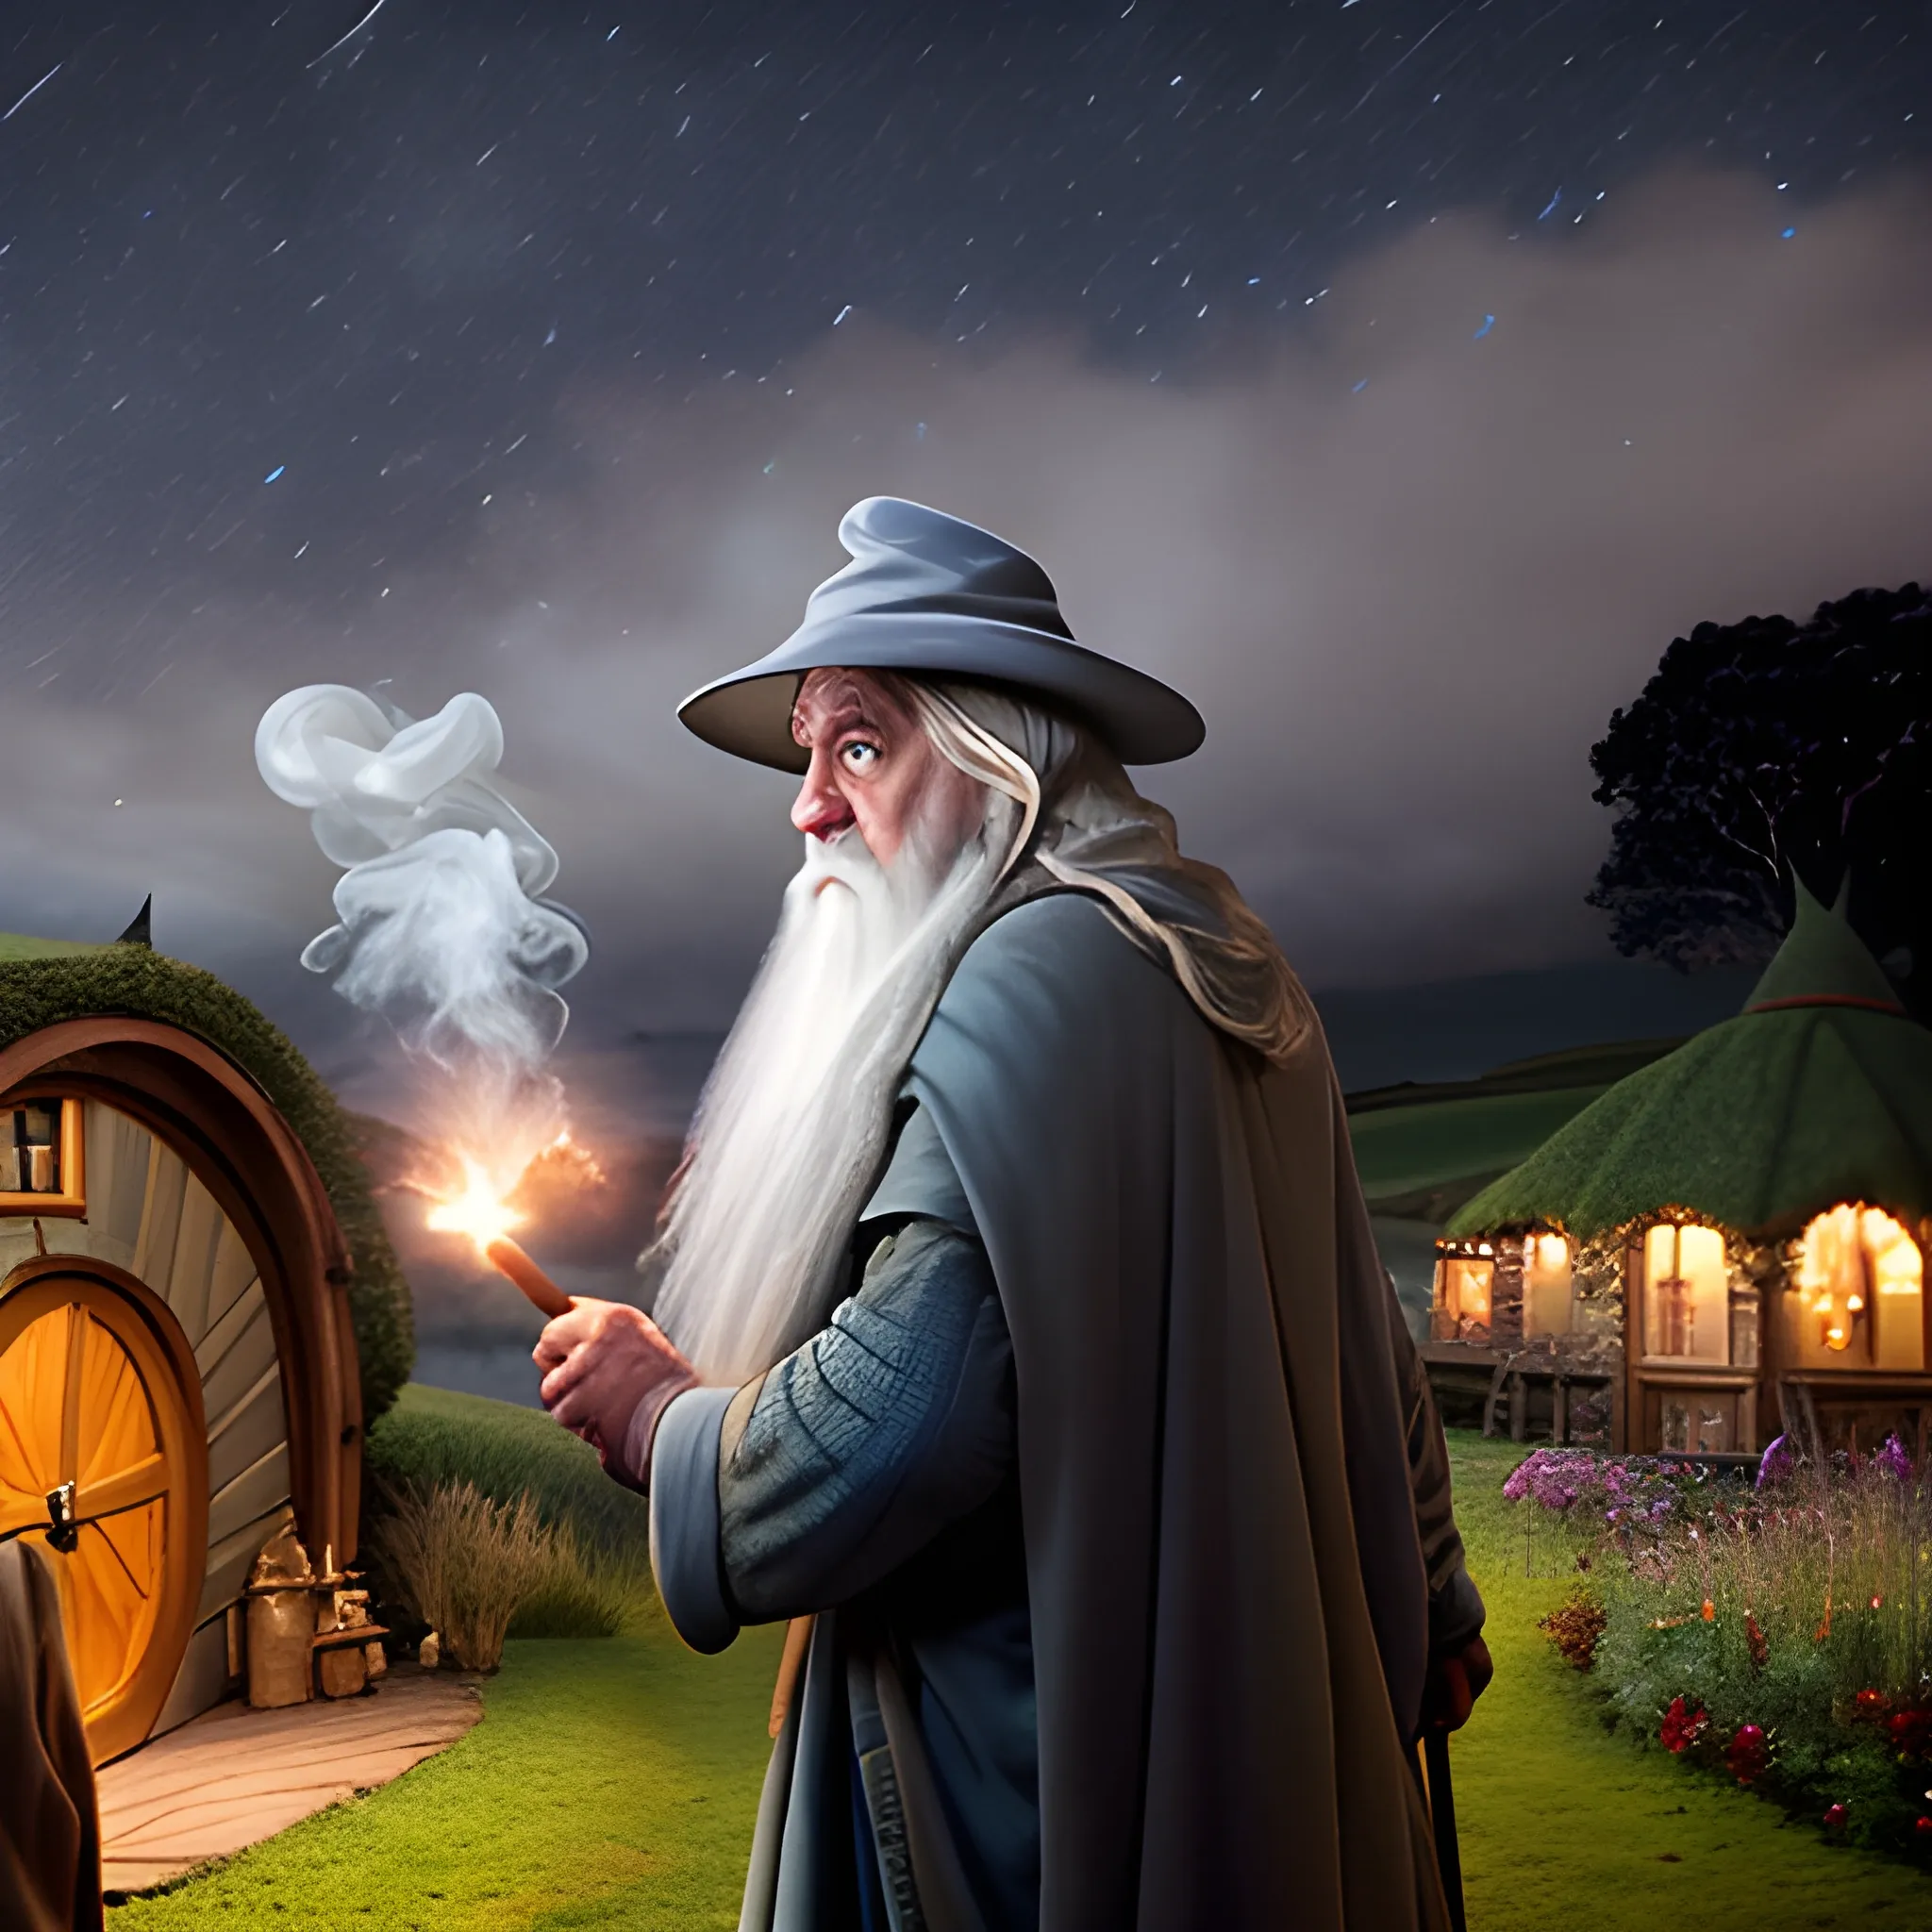 far from frame, gandalf with his hat on, back to camera, smoking pipe, night scene, hobbiton in background, the shire, warmly lit hobbit holes, party tree, celebration, fireworks